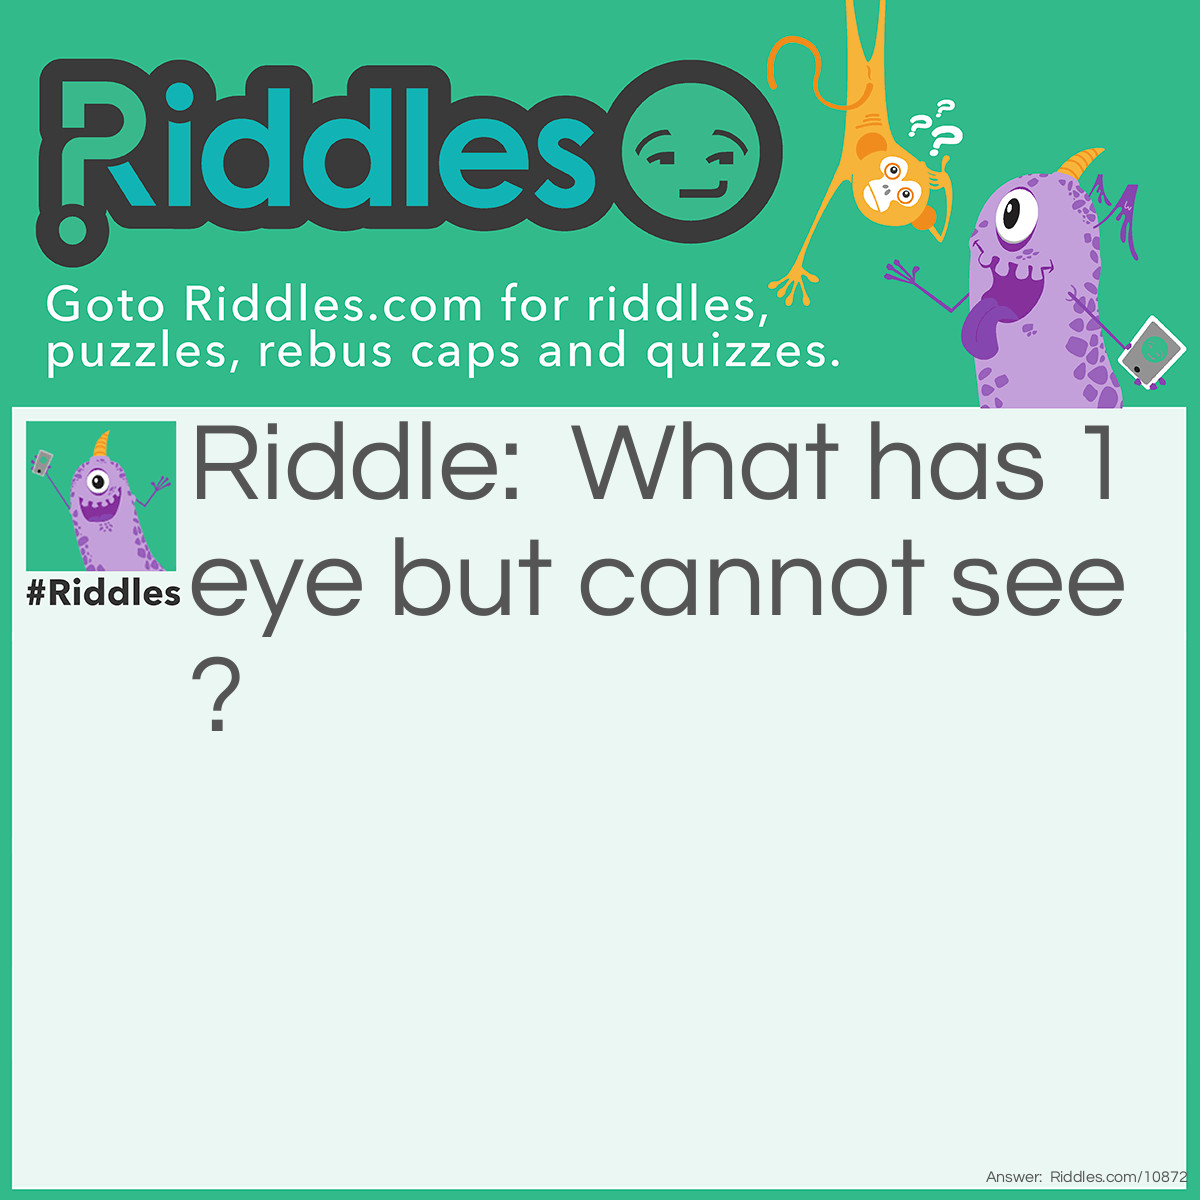 Riddle: What has 1 eye but cannot see? Answer: A needle!